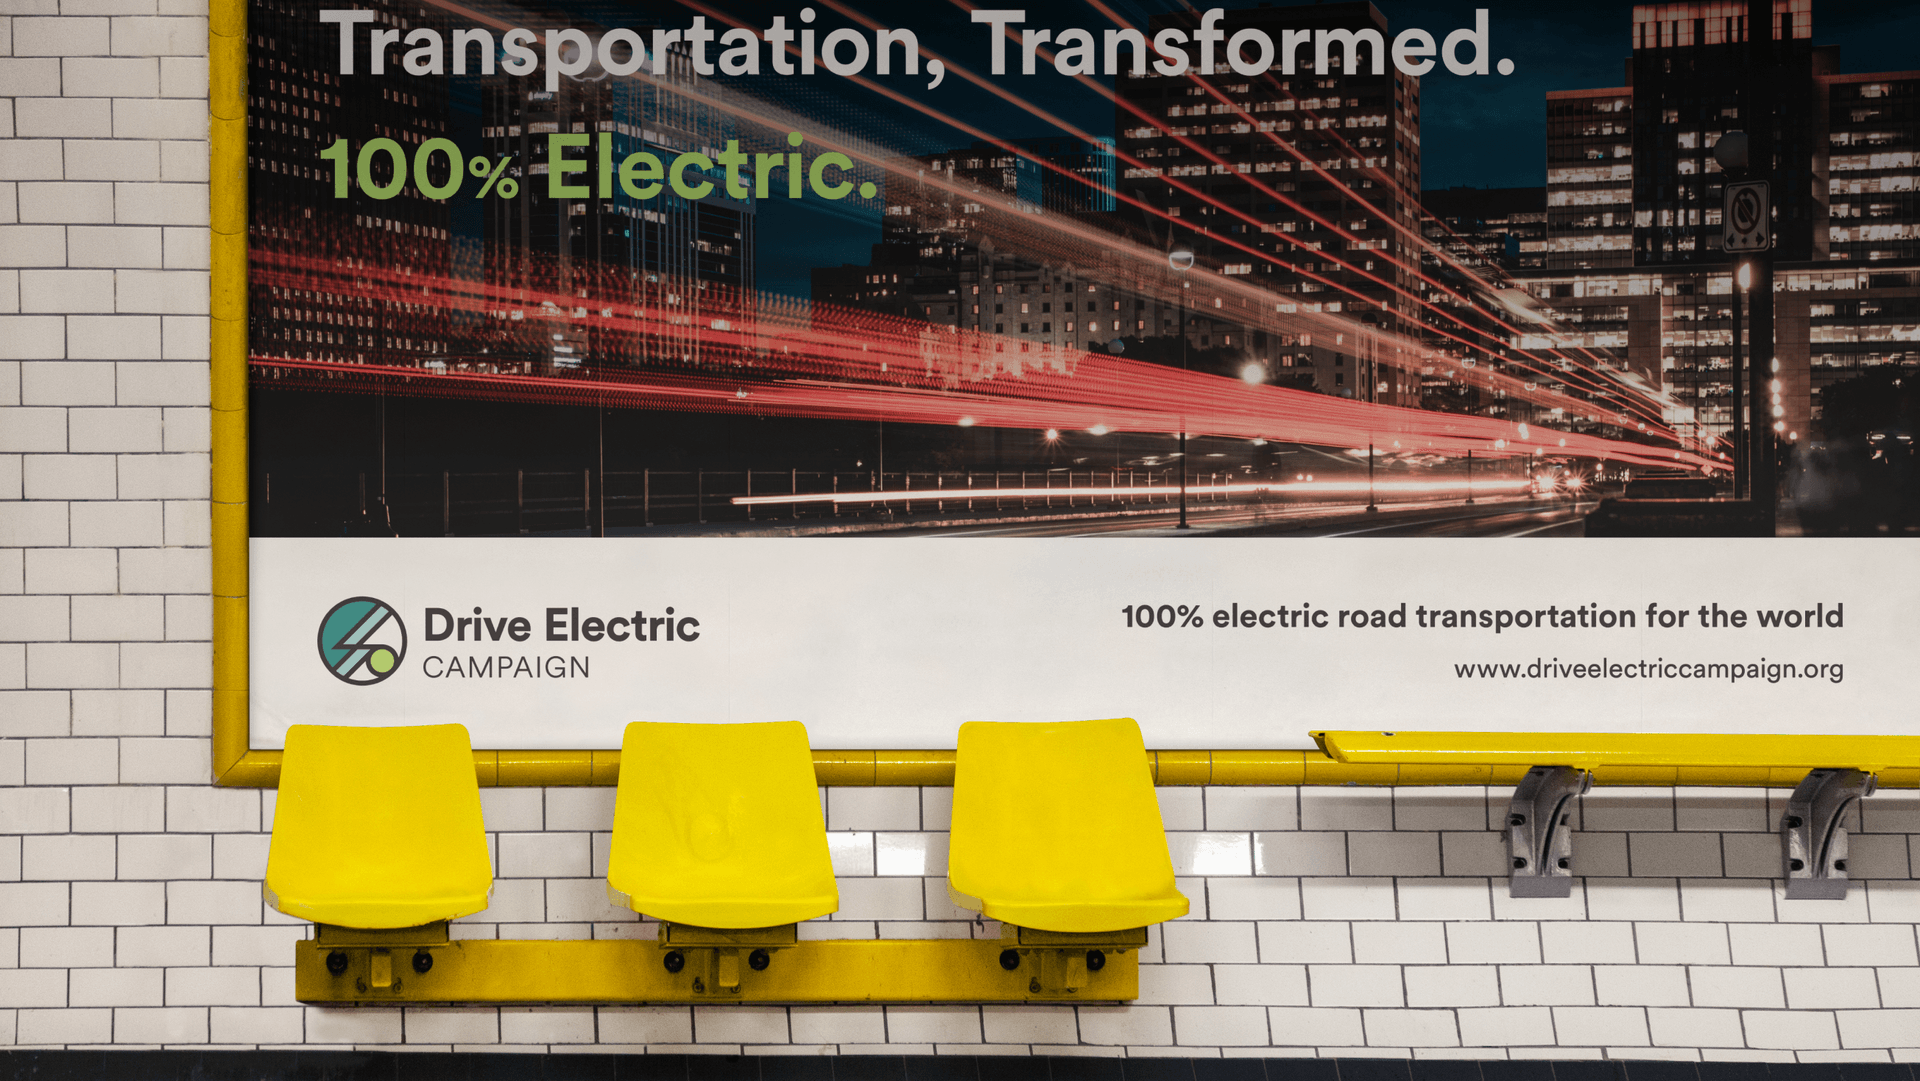 Designing for a 100% electrified transportation grid.